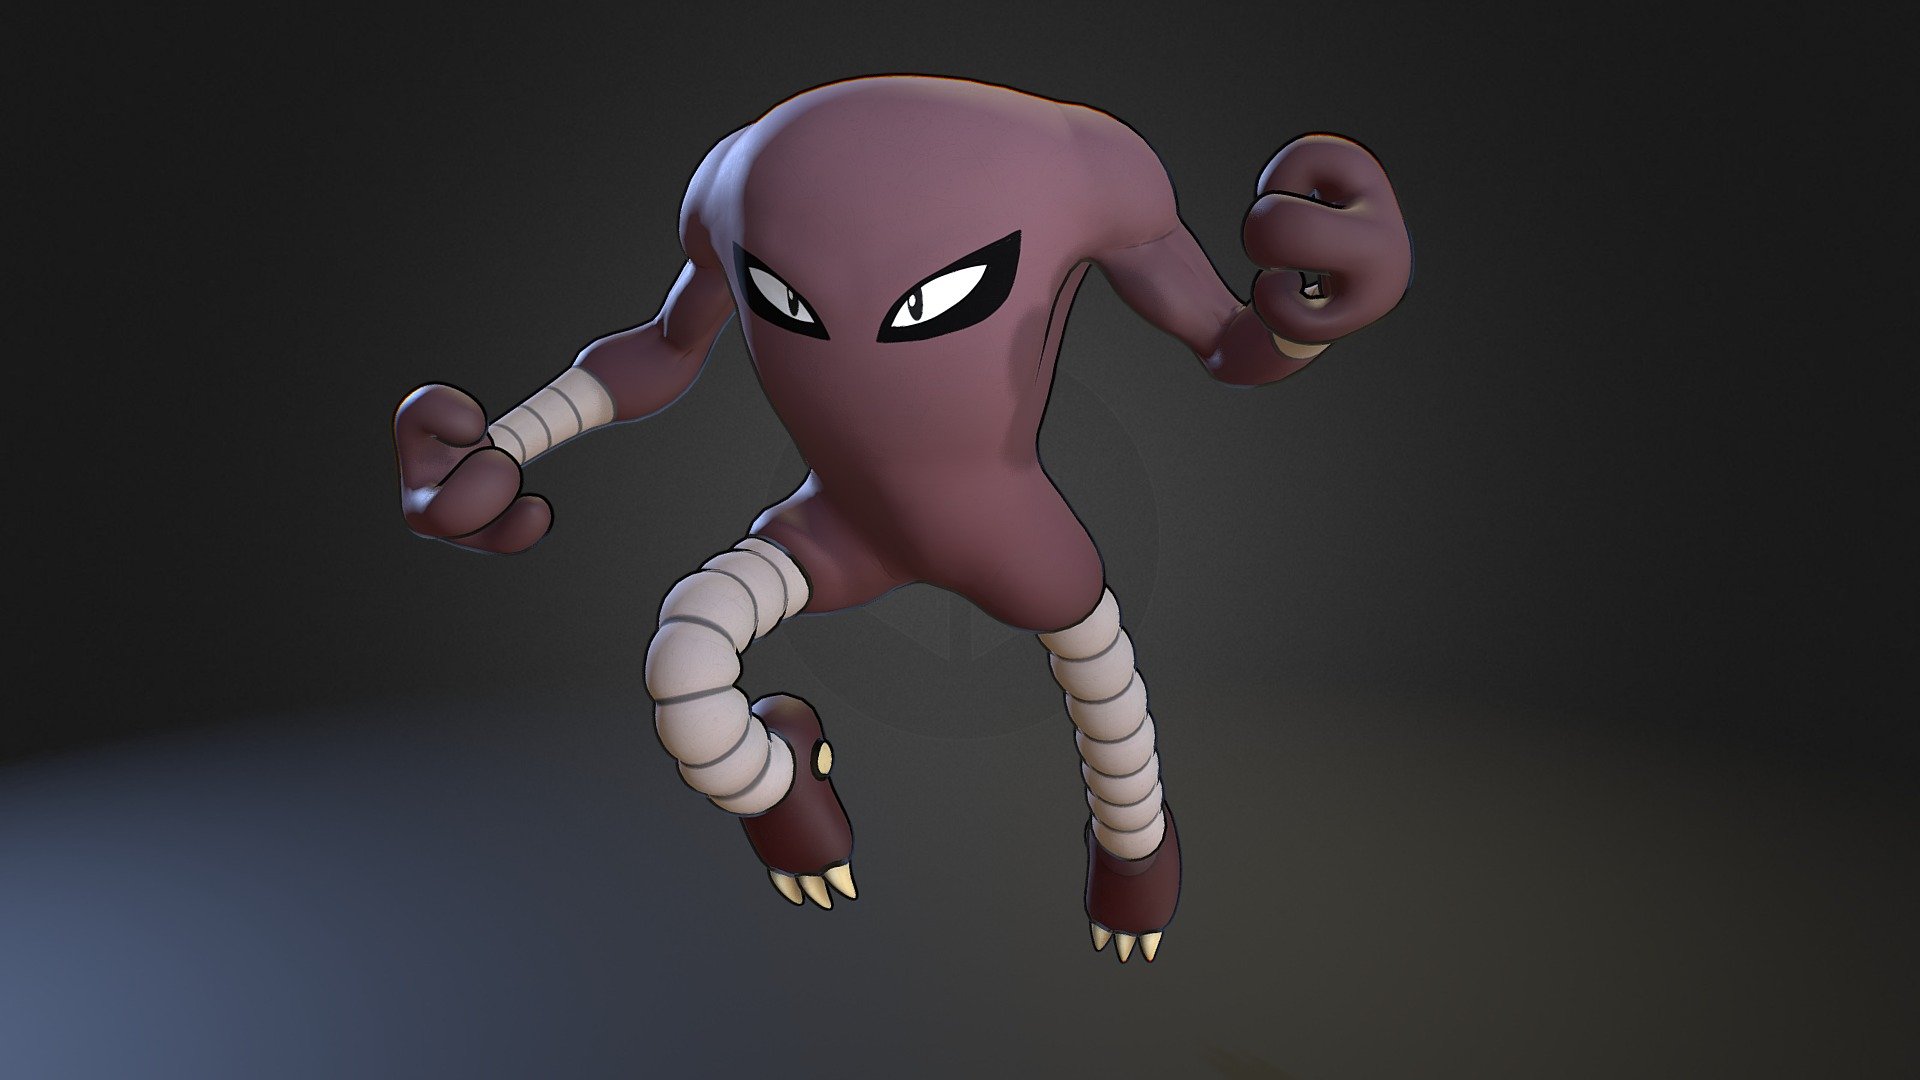 The one without head - Hitmonlee Pokemon - 3D model by 3dlogicus 3d model